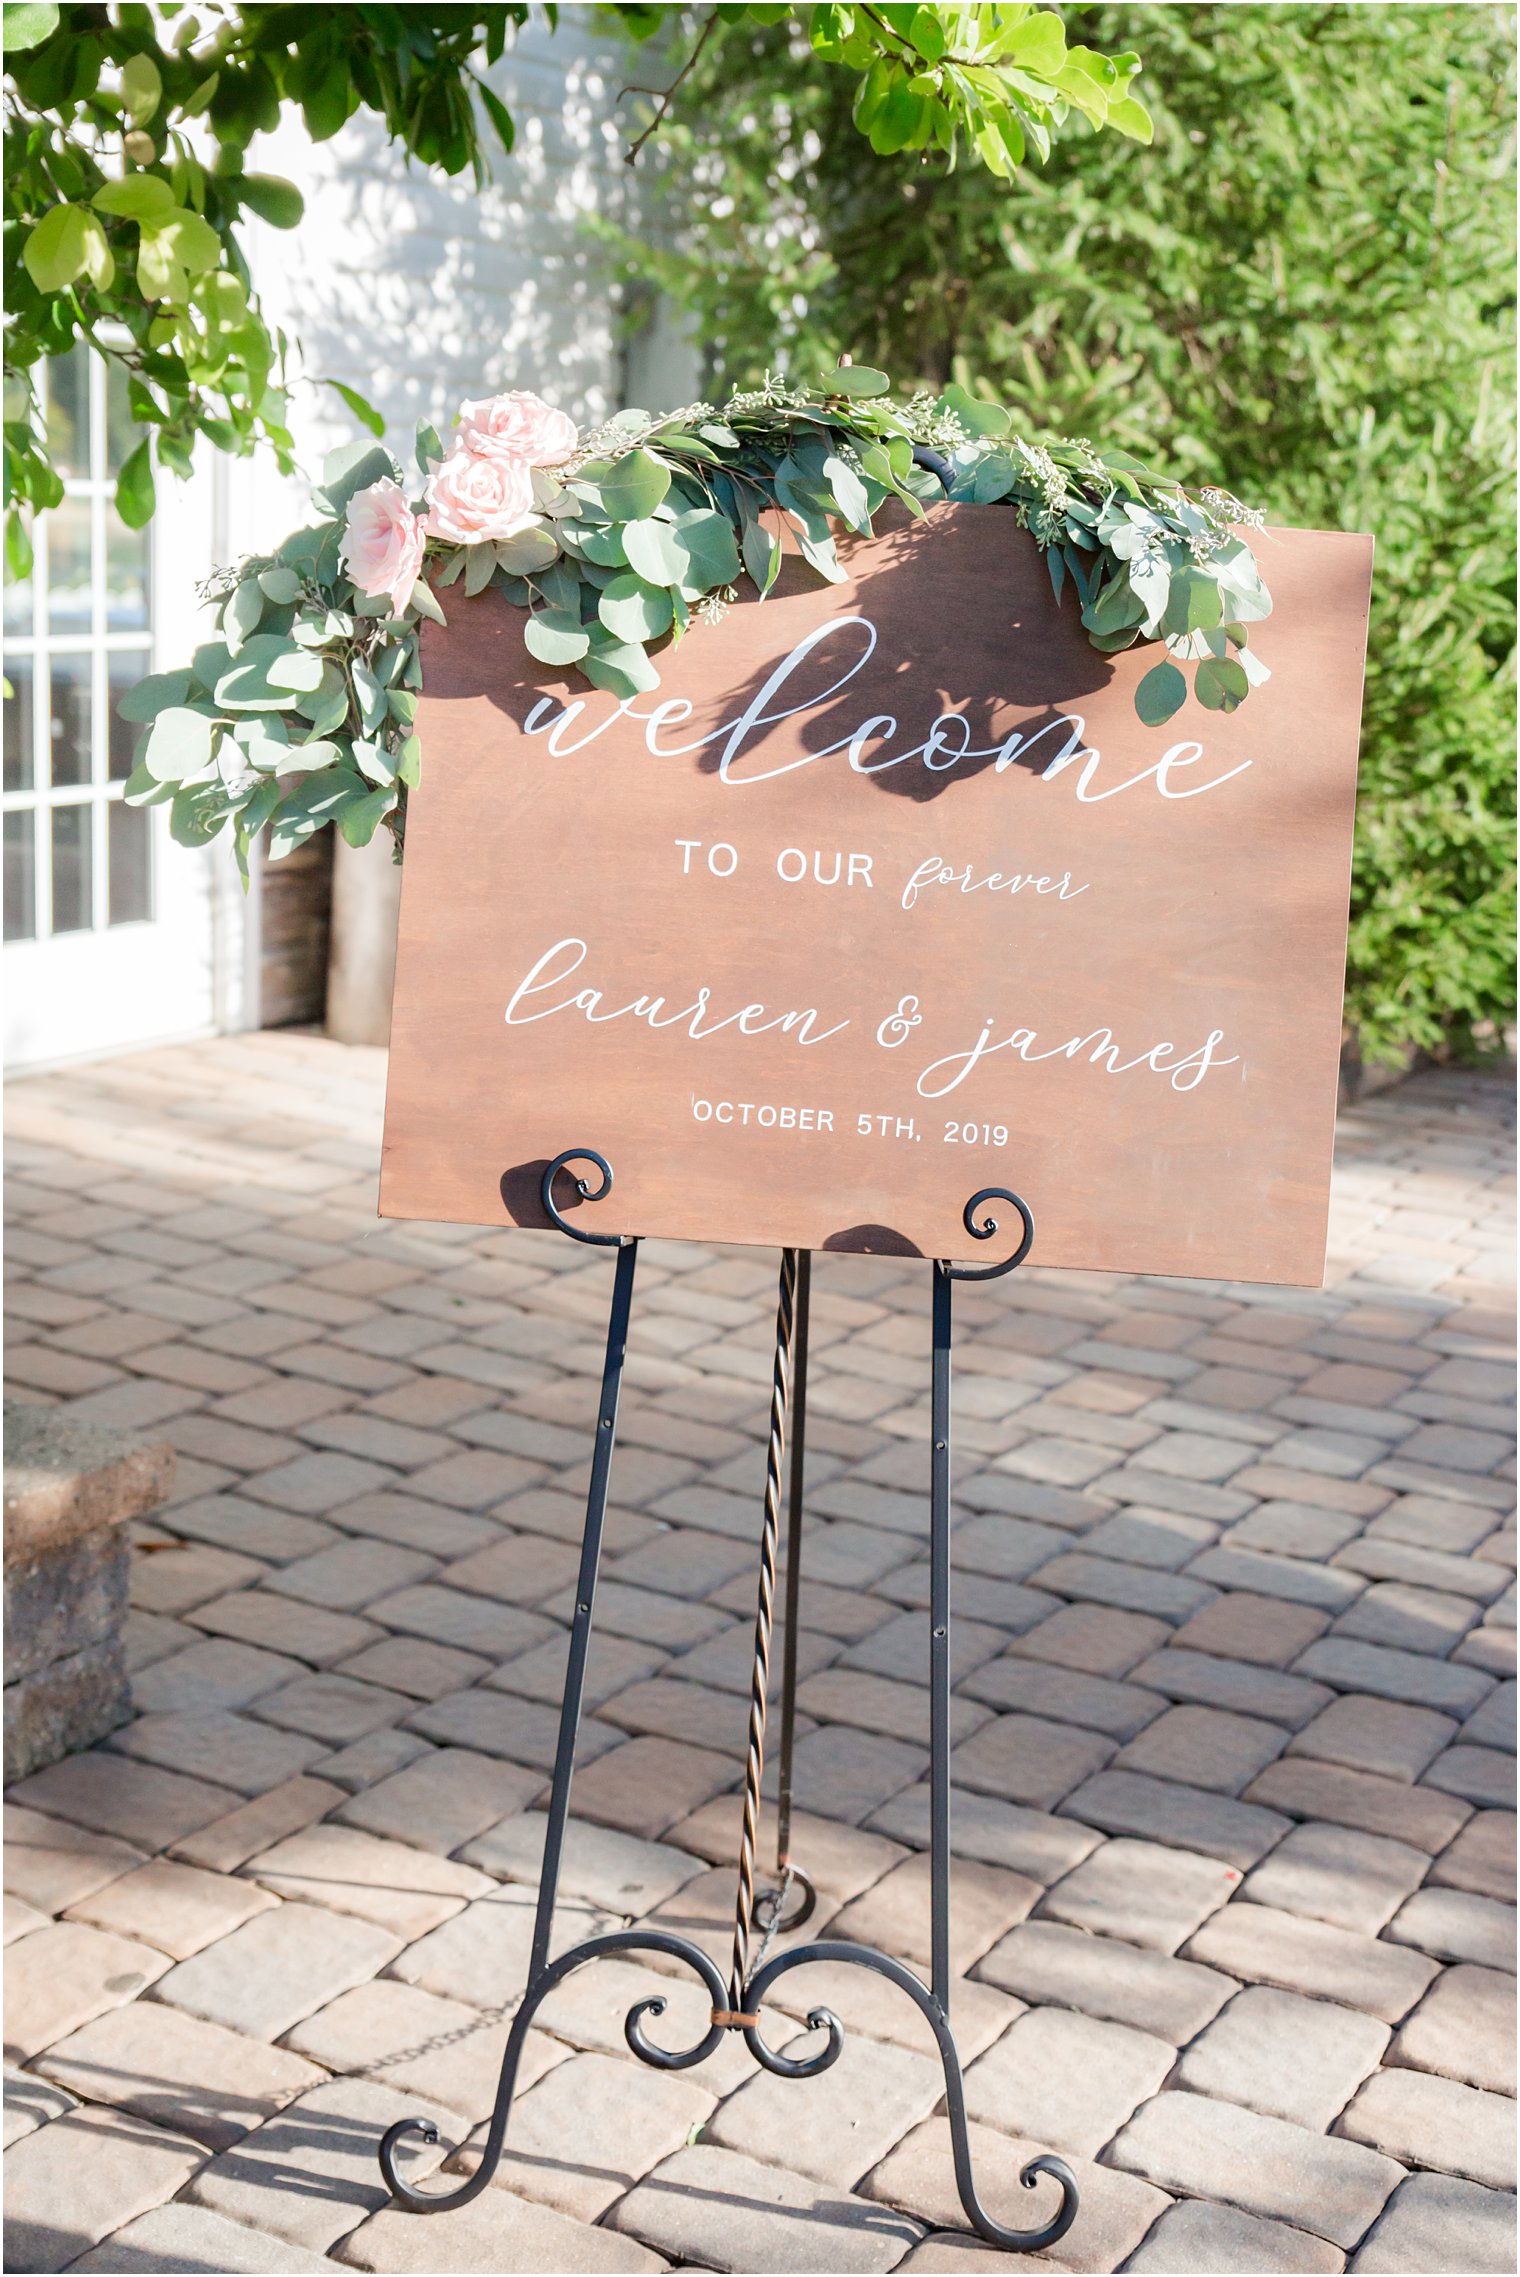 wedding sign for Windows on the Water at Frogbridge wedding ceremony